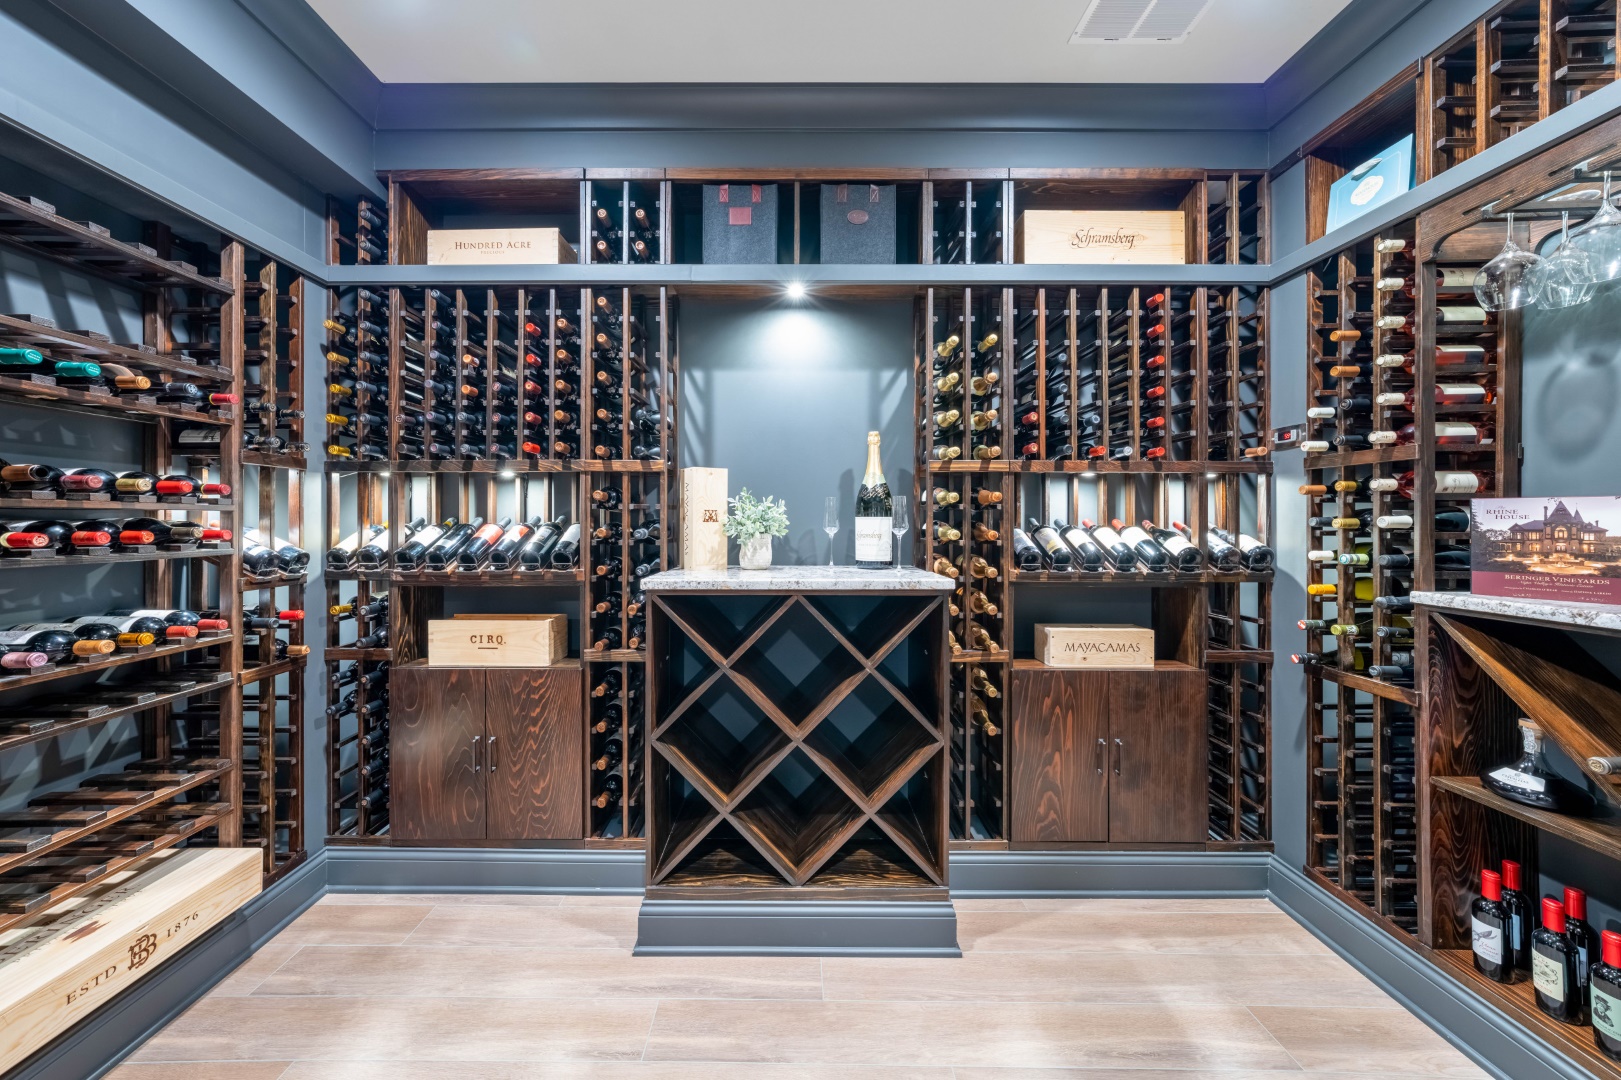 The Perfect Blend: 15 Transitional Wine Cellar Designs